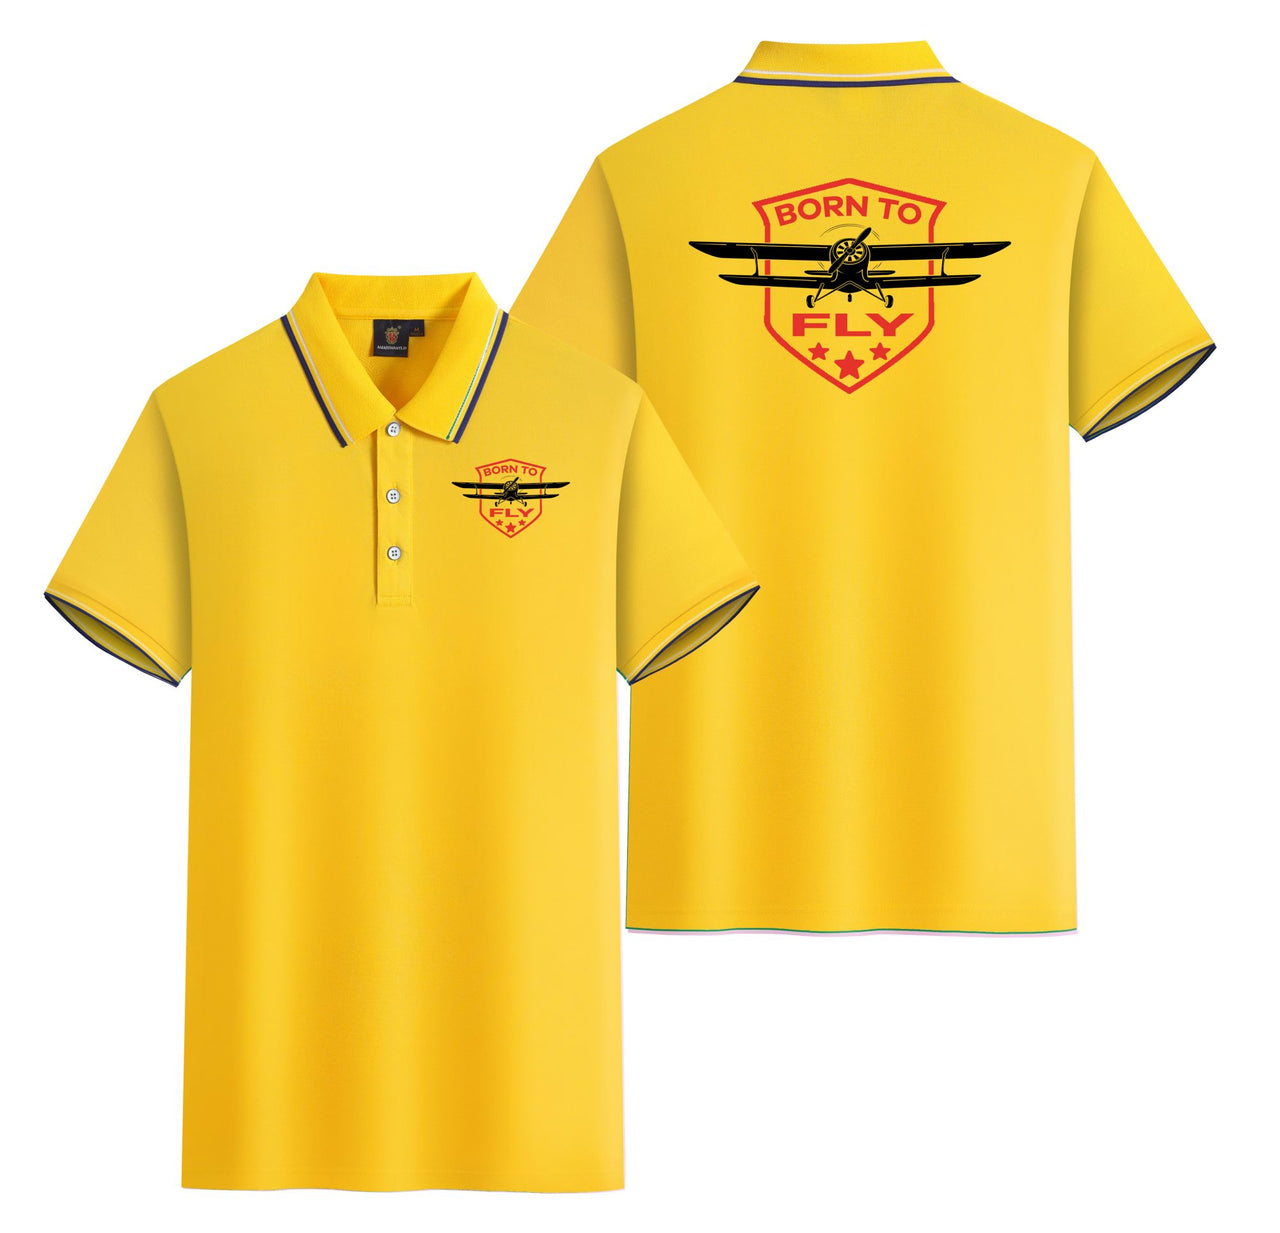 Super Born To Fly Designed Stylish Polo T-Shirts (Double-Side)